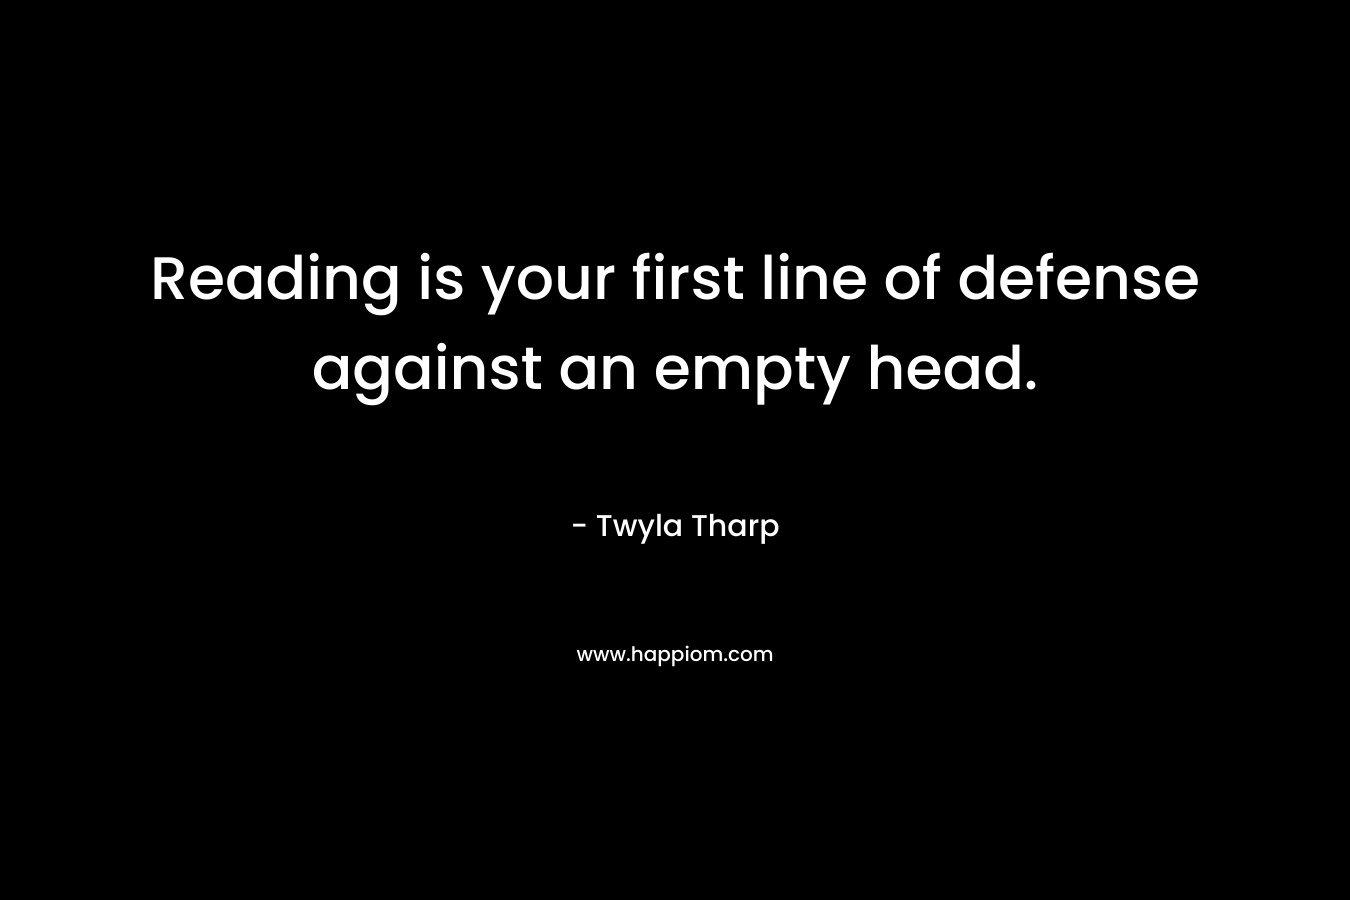 Reading is your first line of defense against an empty head. – Twyla Tharp